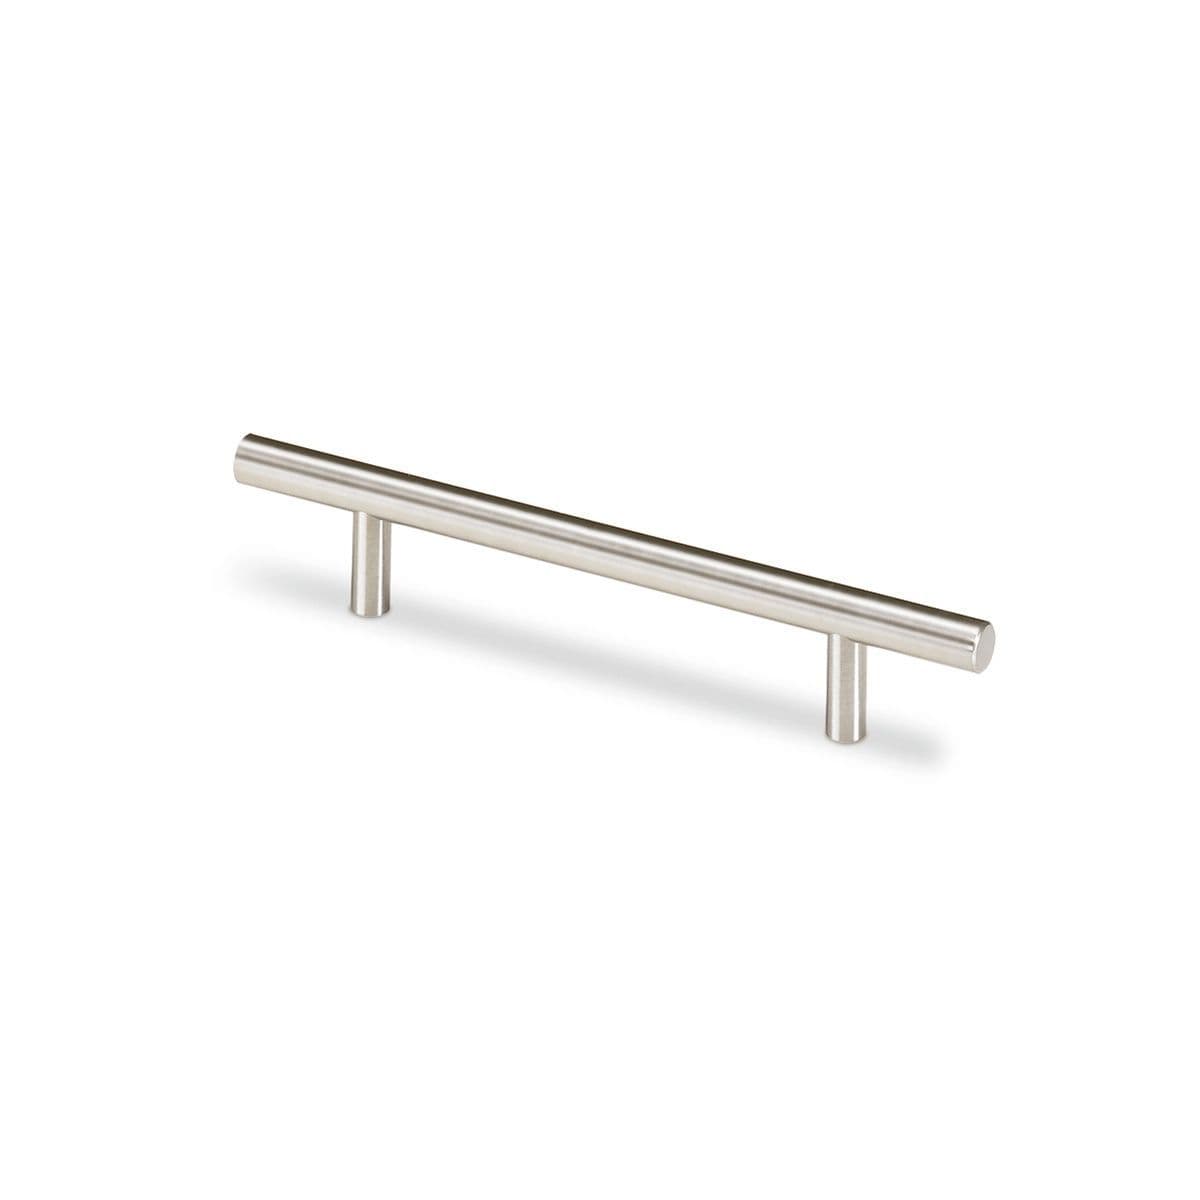 SALVIA 10mm dia T BAR Cupboard Handle - 5 sizes - BRUSHED STAINLESS STEEL (HETTICH - New Modern)